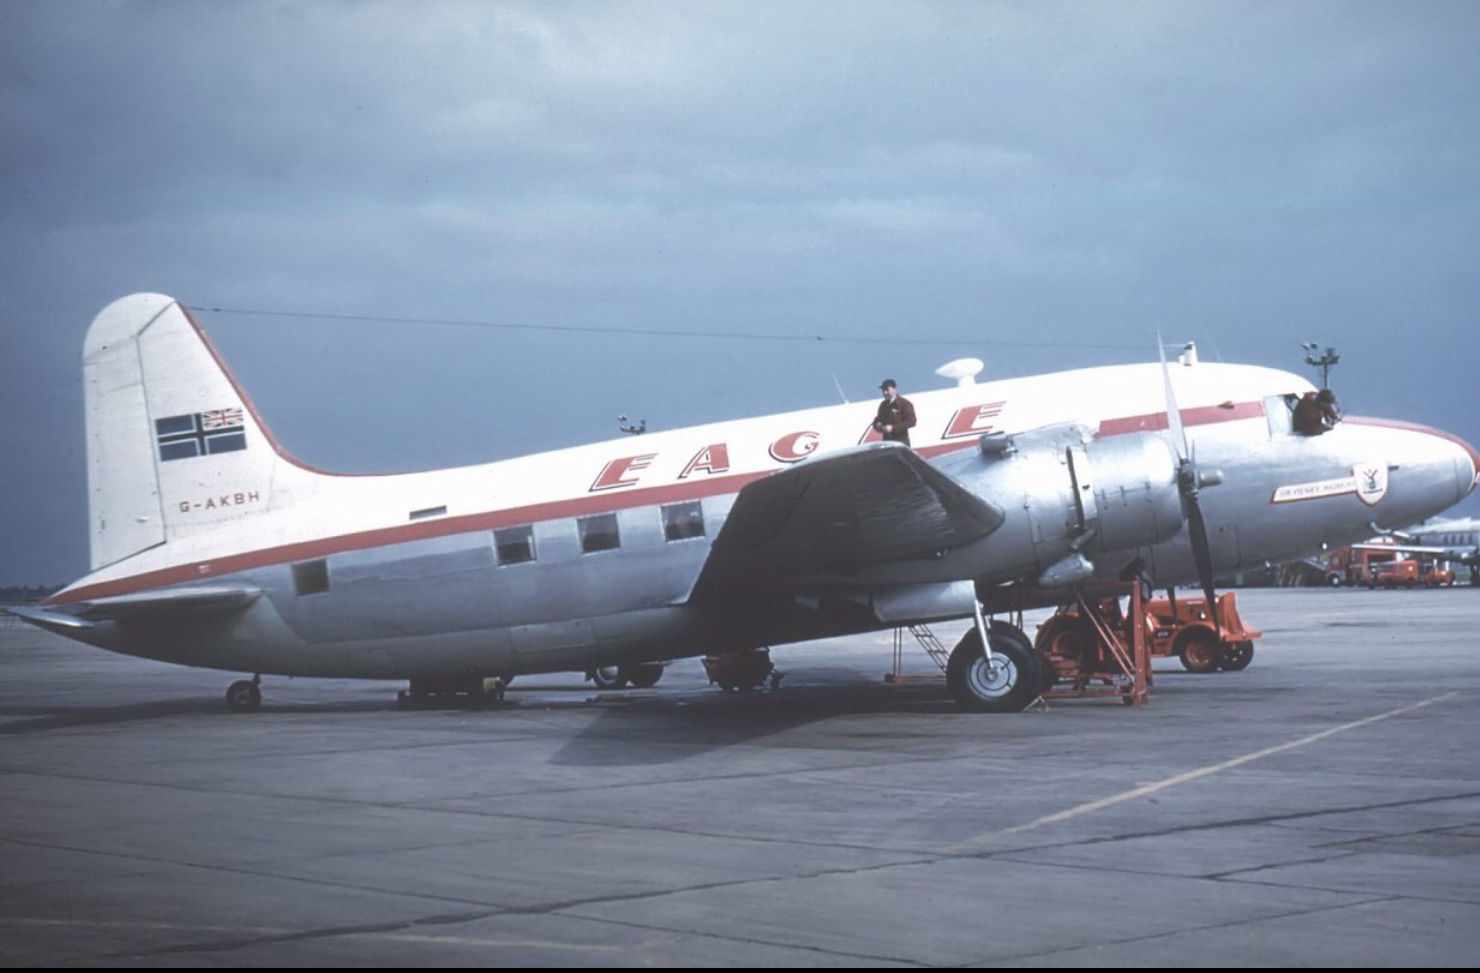 Trevor's Stickies: Eagle Airways - early Vickers Viking.